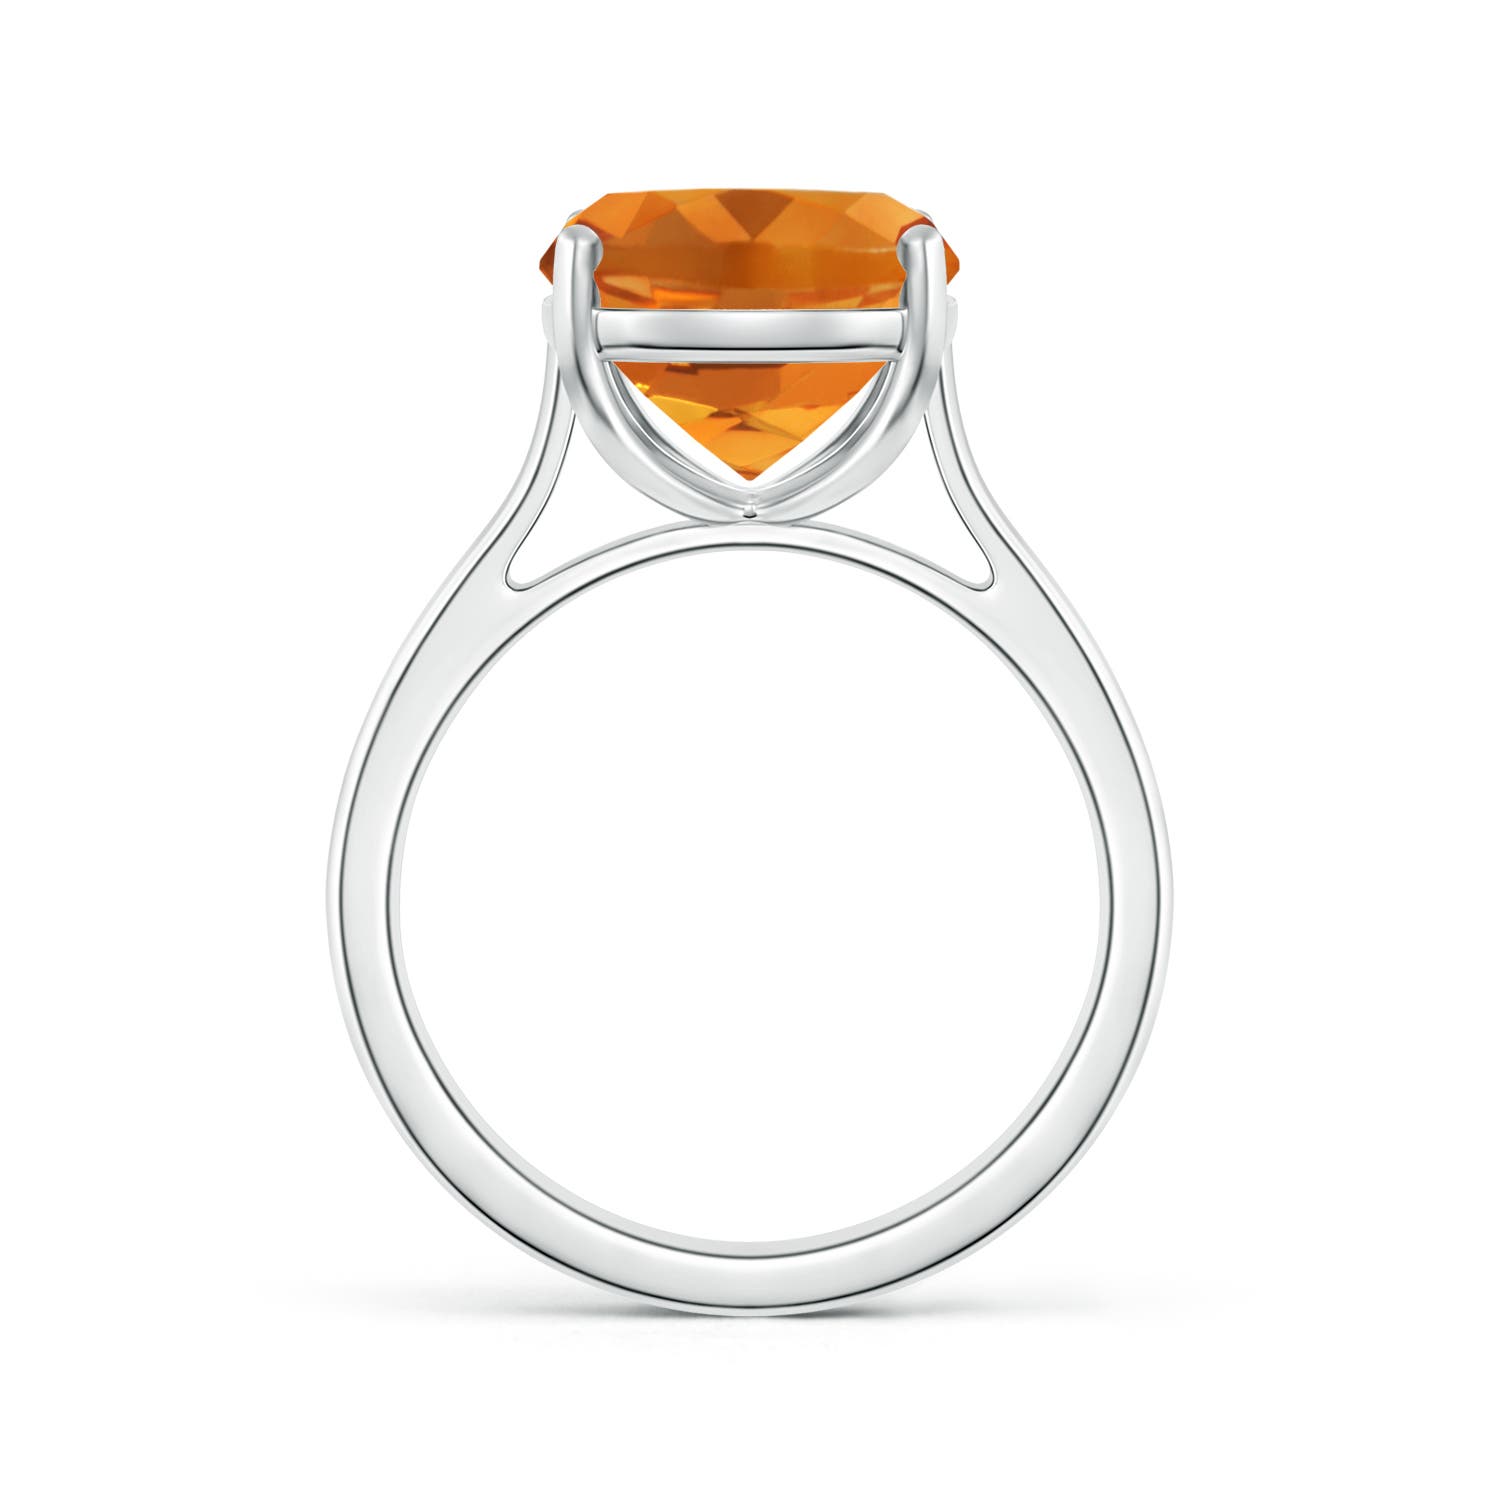 AAA - Citrine / 4.74 CT / 14 KT White Gold